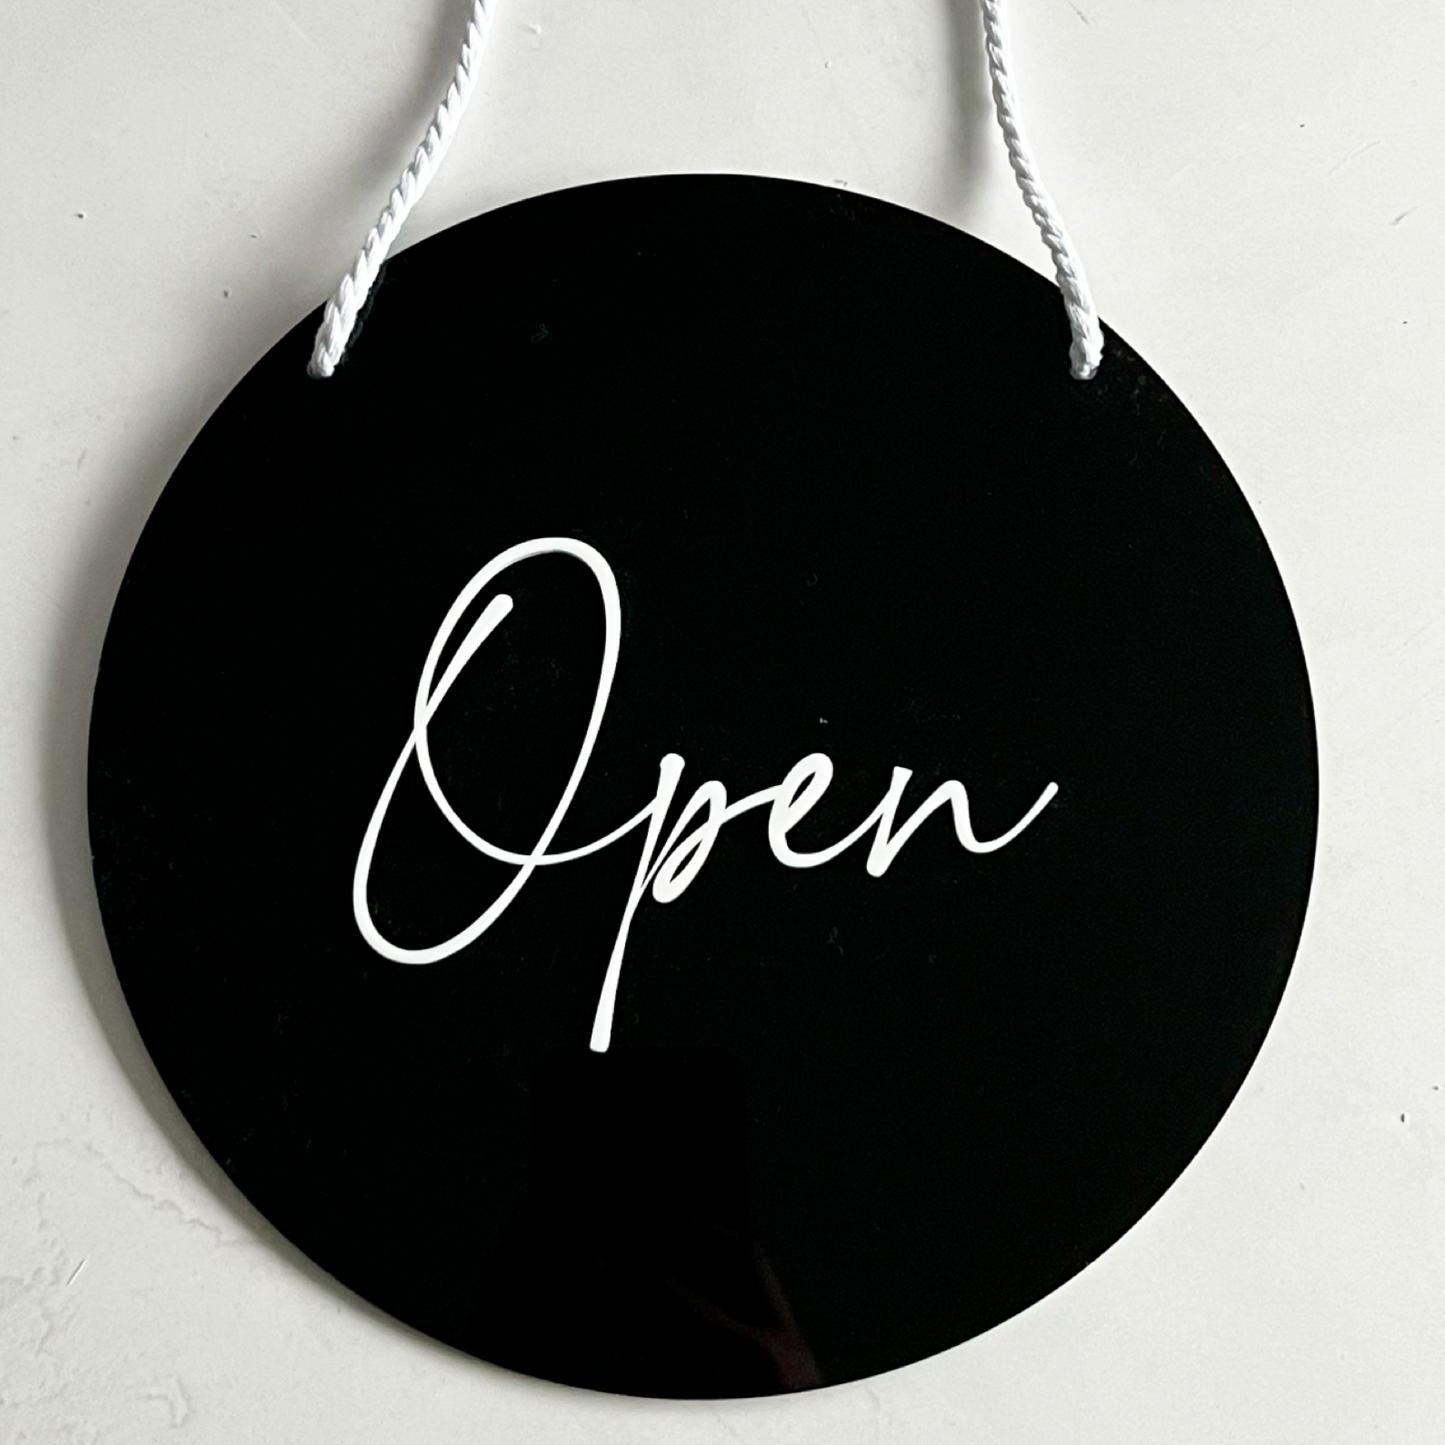 Open / Closed Hanging Sign